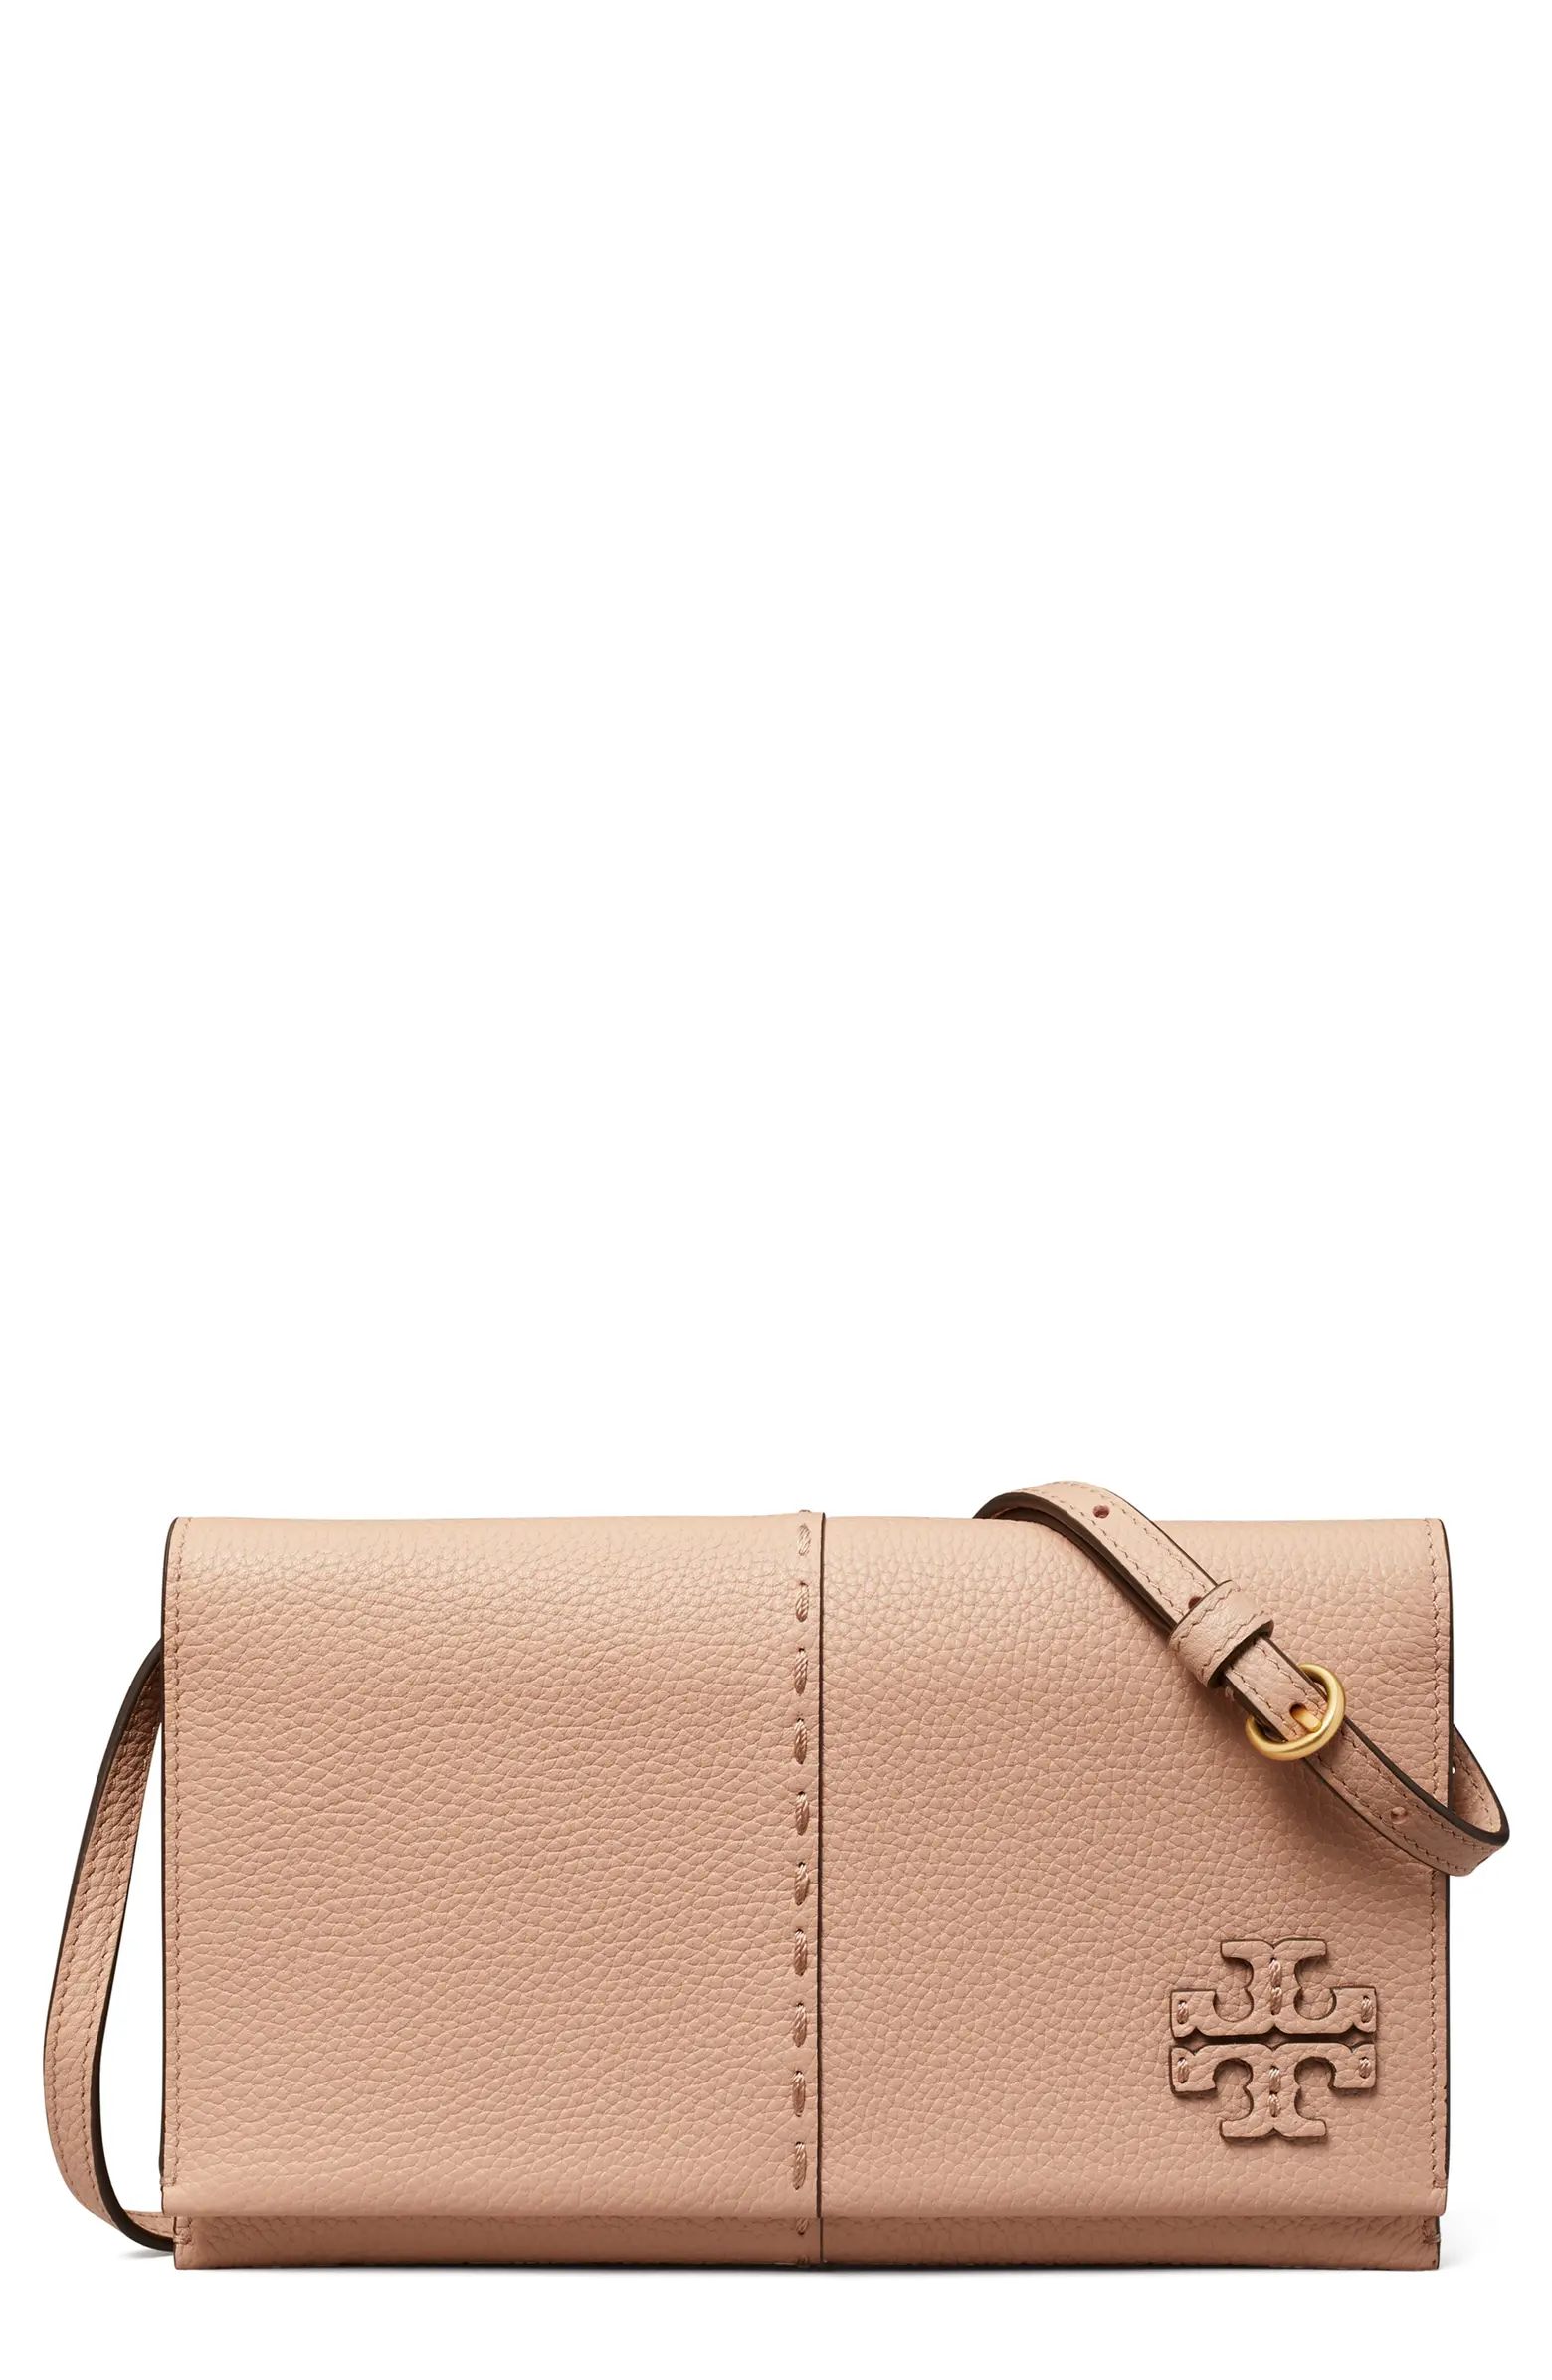 Tory Burch McGraw Leather Wallet Crossbody | Nordstrom | Nordstrom